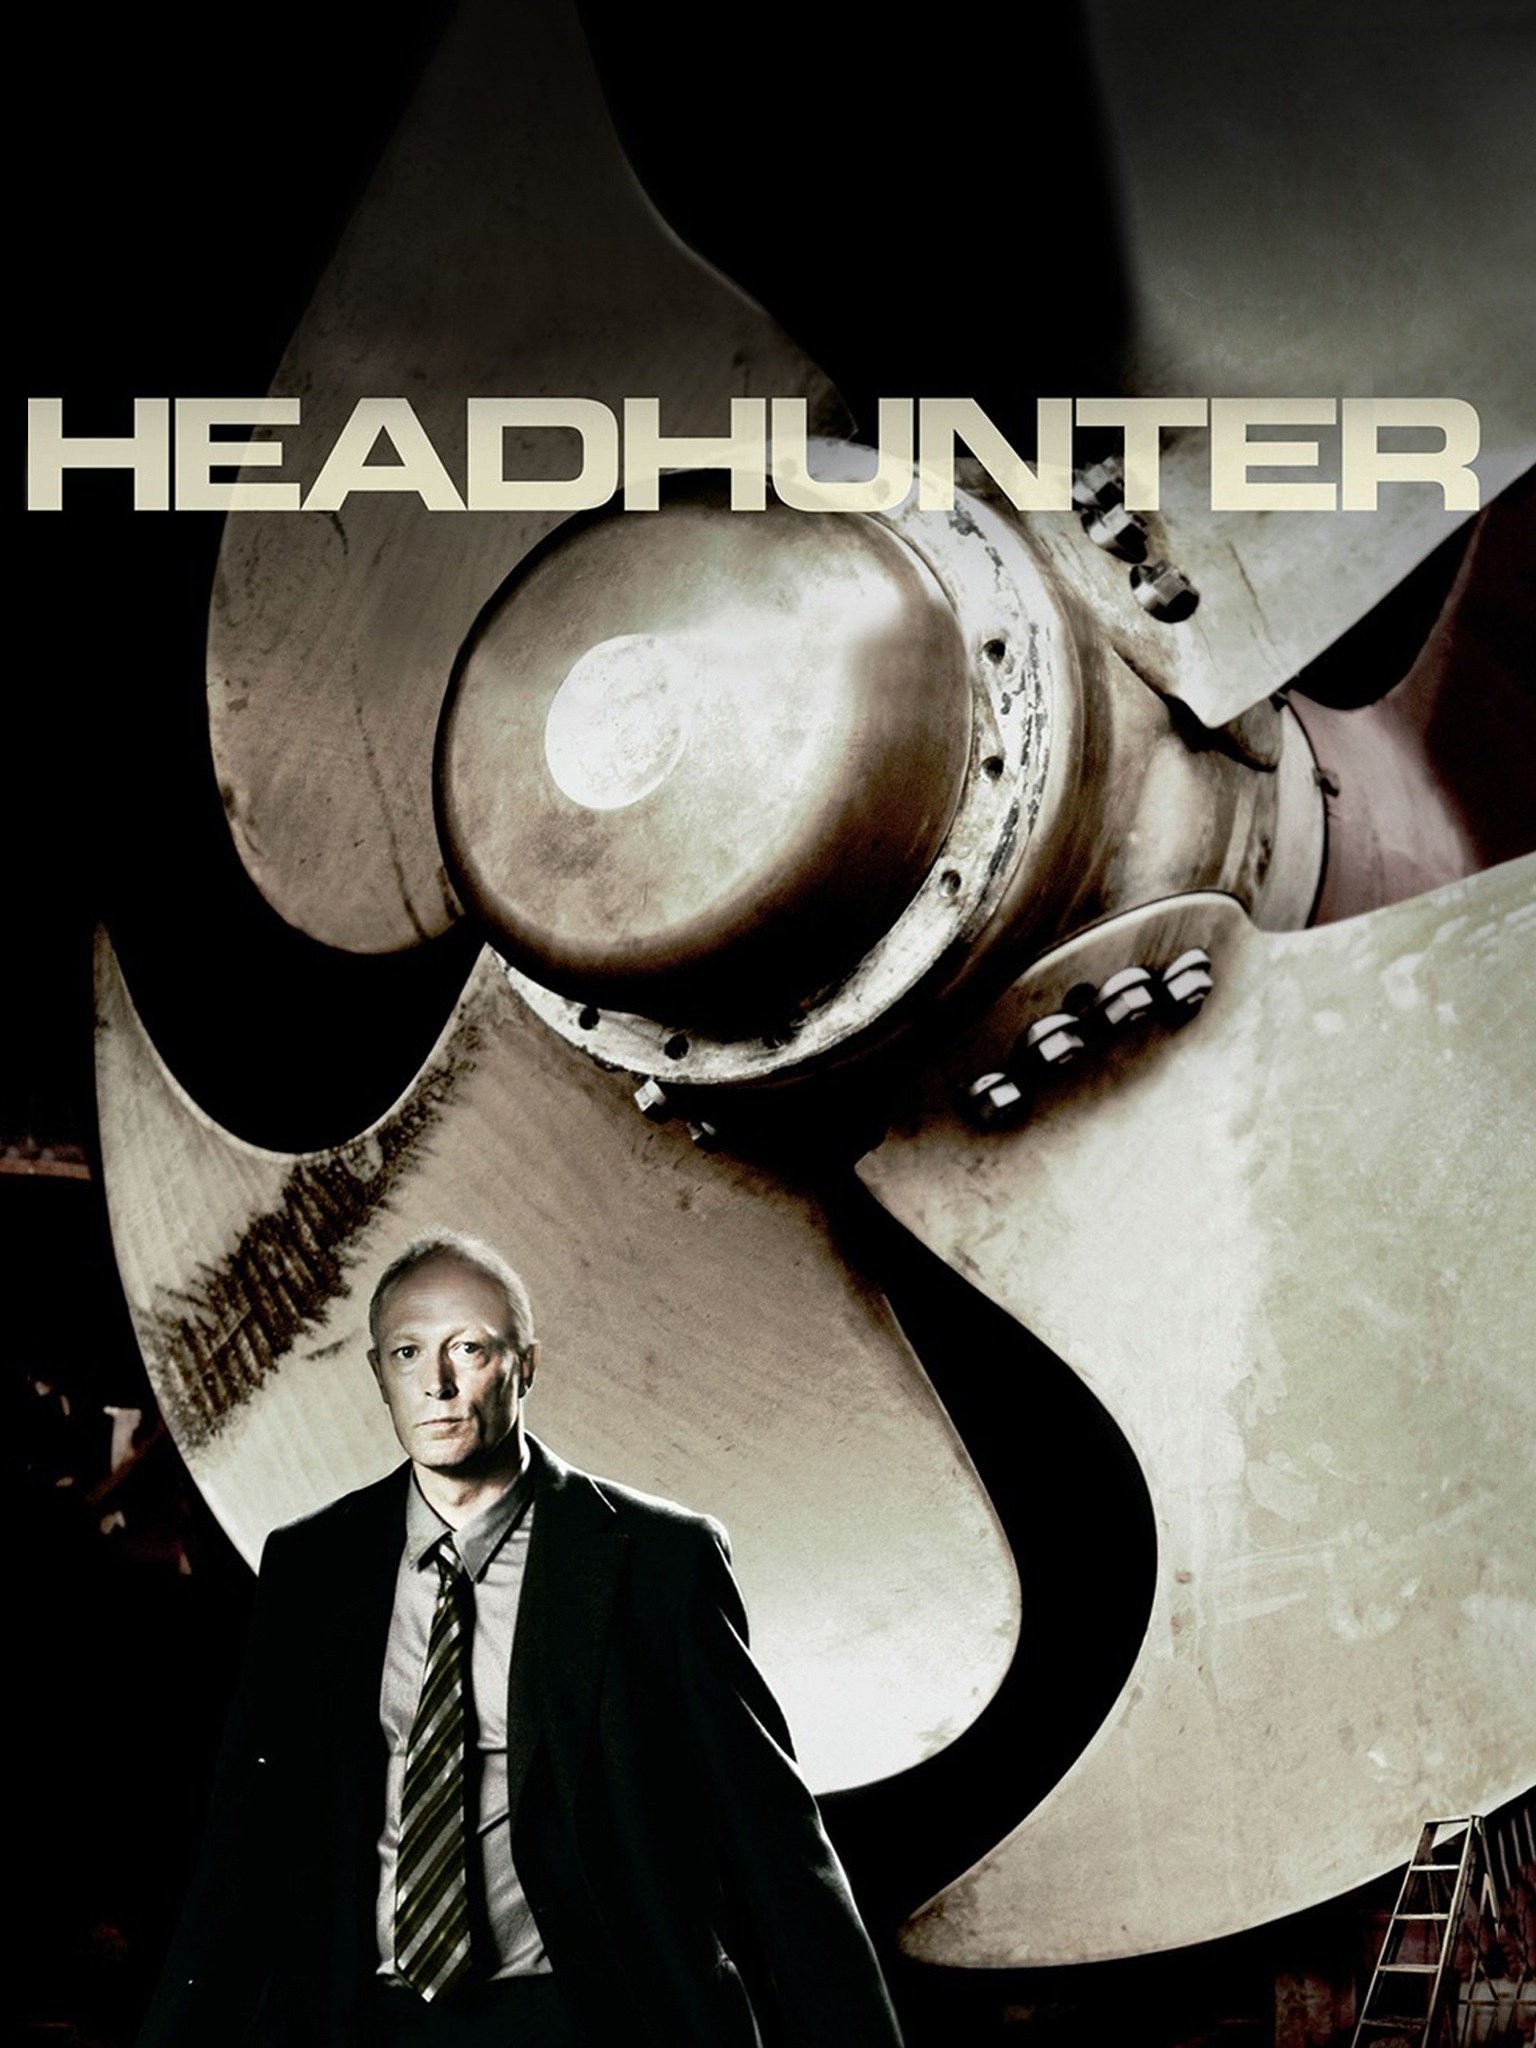 Headhunters - movie: where to watch streaming online